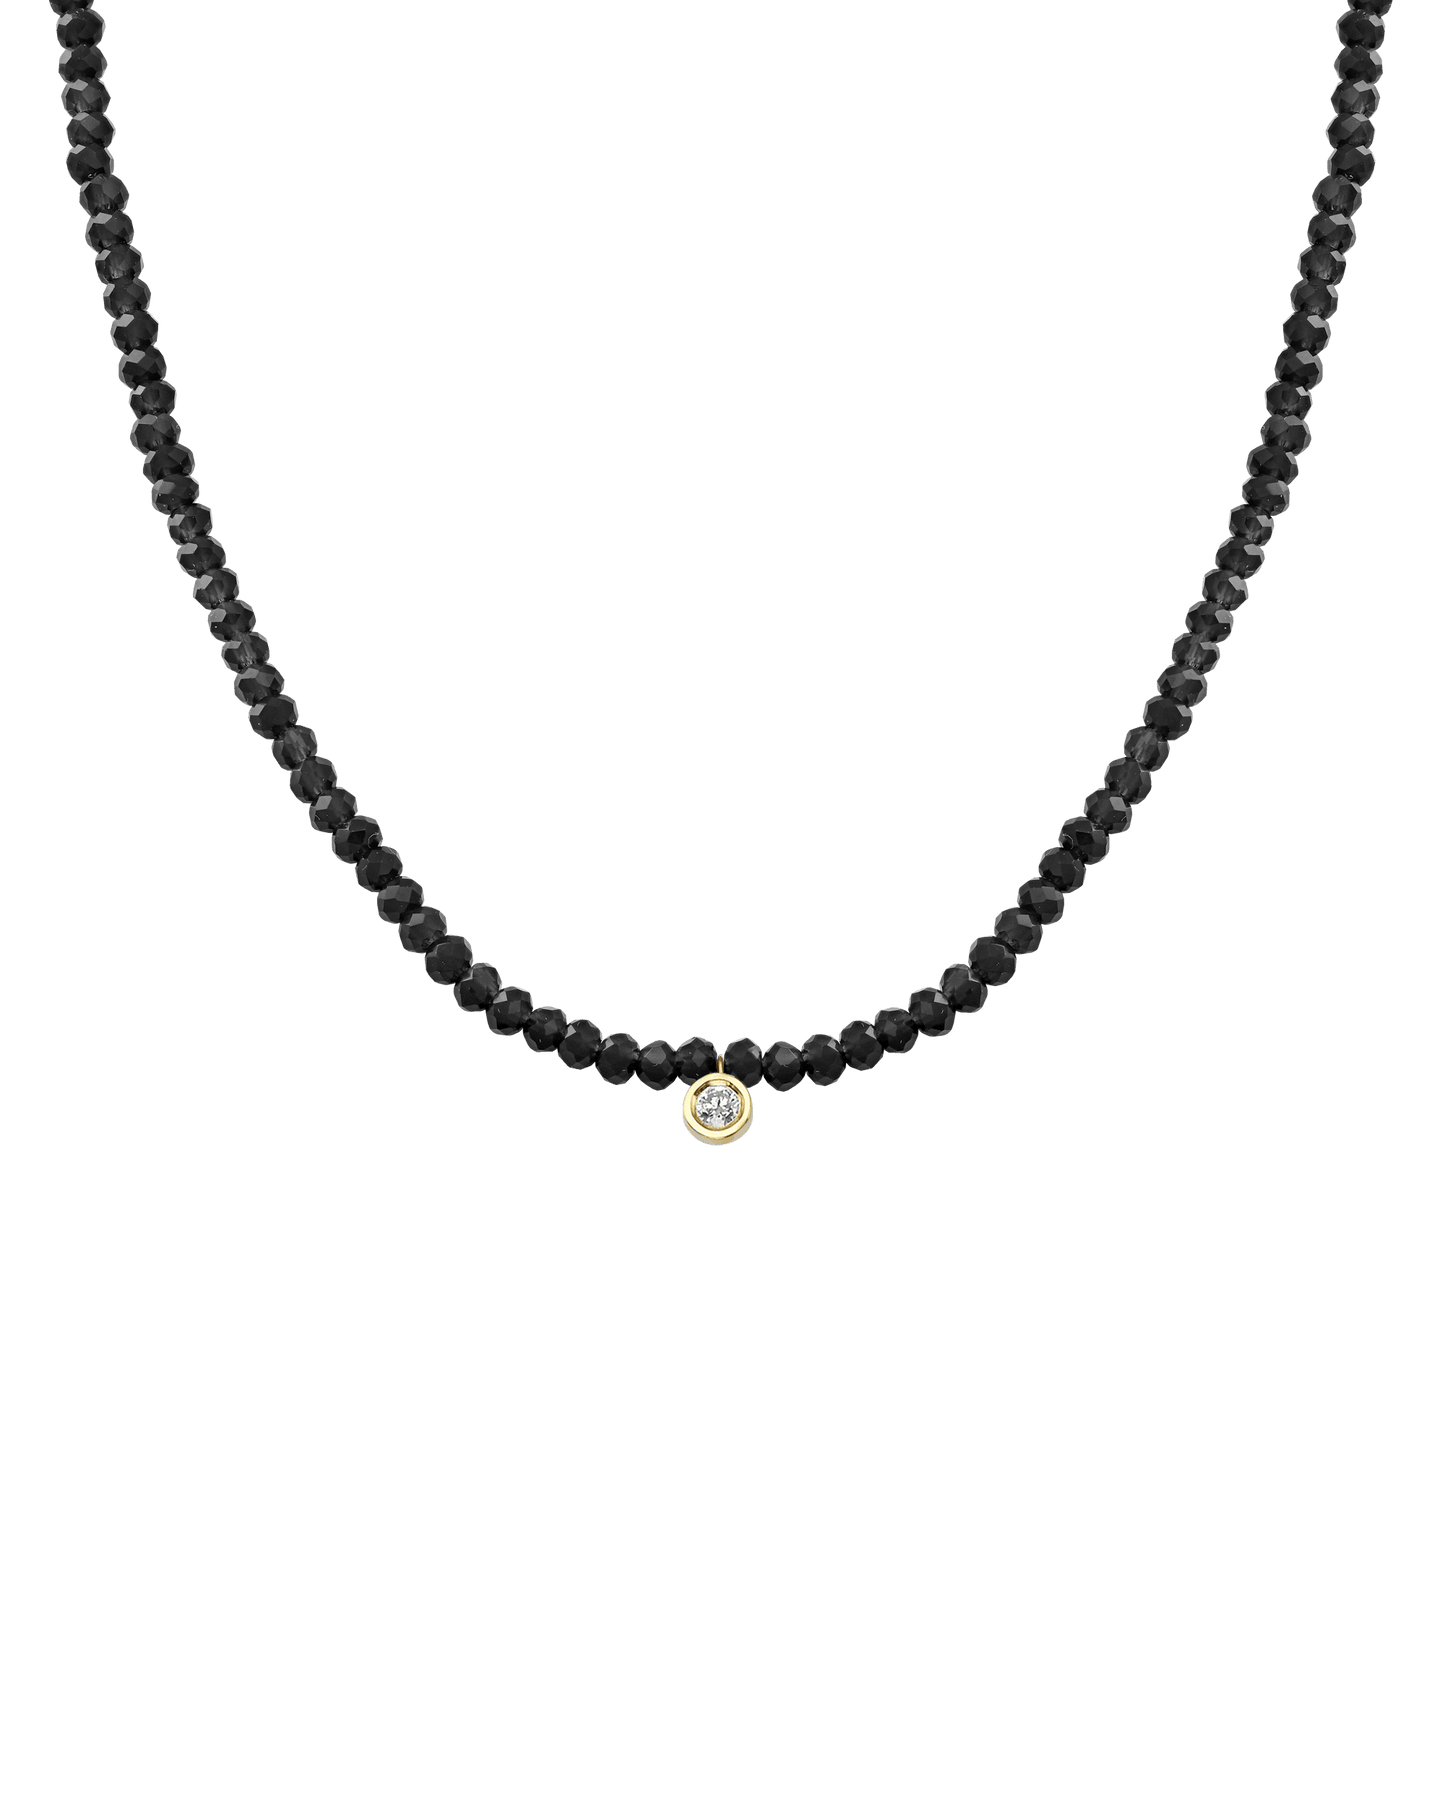 Apatite Gemstone & Diamond Necklace - 14K Yellow Gold Necklaces 14K Solid Gold Glass Beads Black Spinnel Medium: 0.05ct 14"